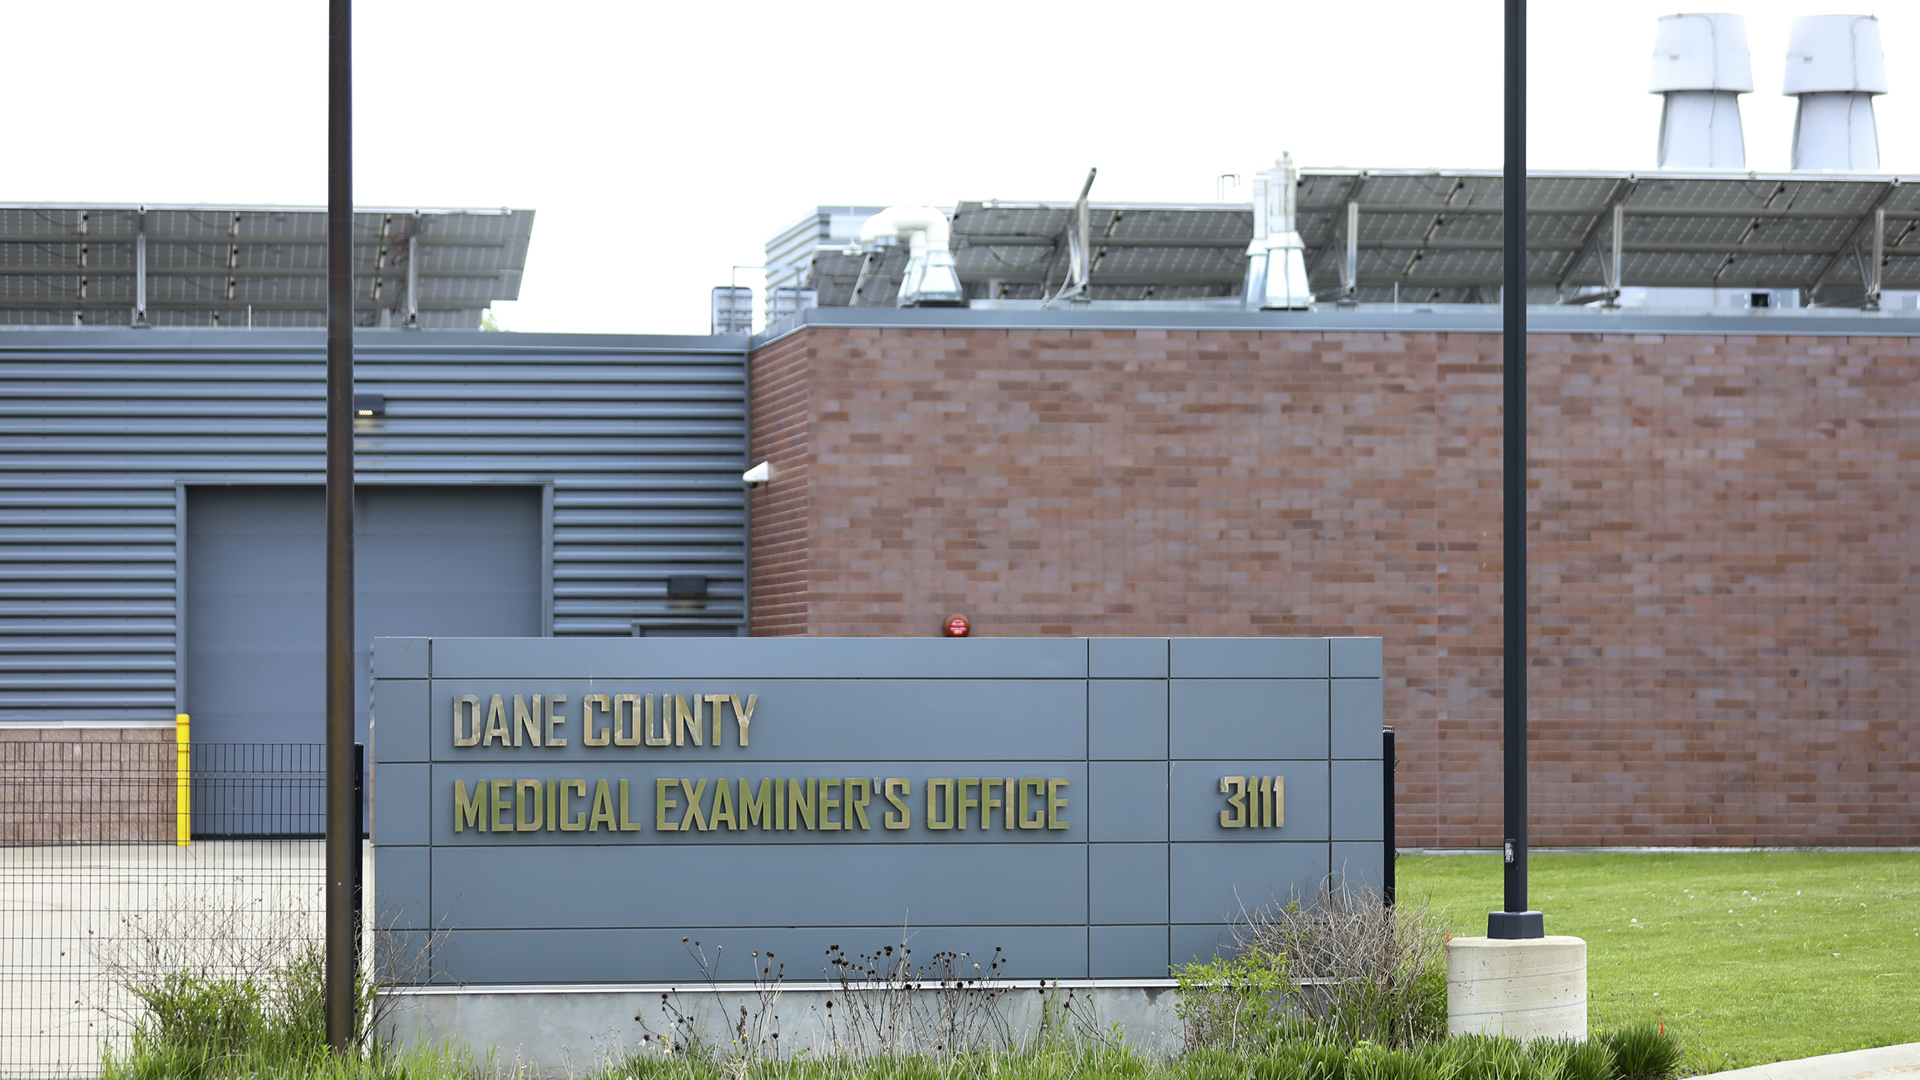 A two-story building with areas of brick wall, metal siding, few windows and rooftop solar panels is fronted by a driveway and a sign reading "Dane County Medical Examiner's Office."